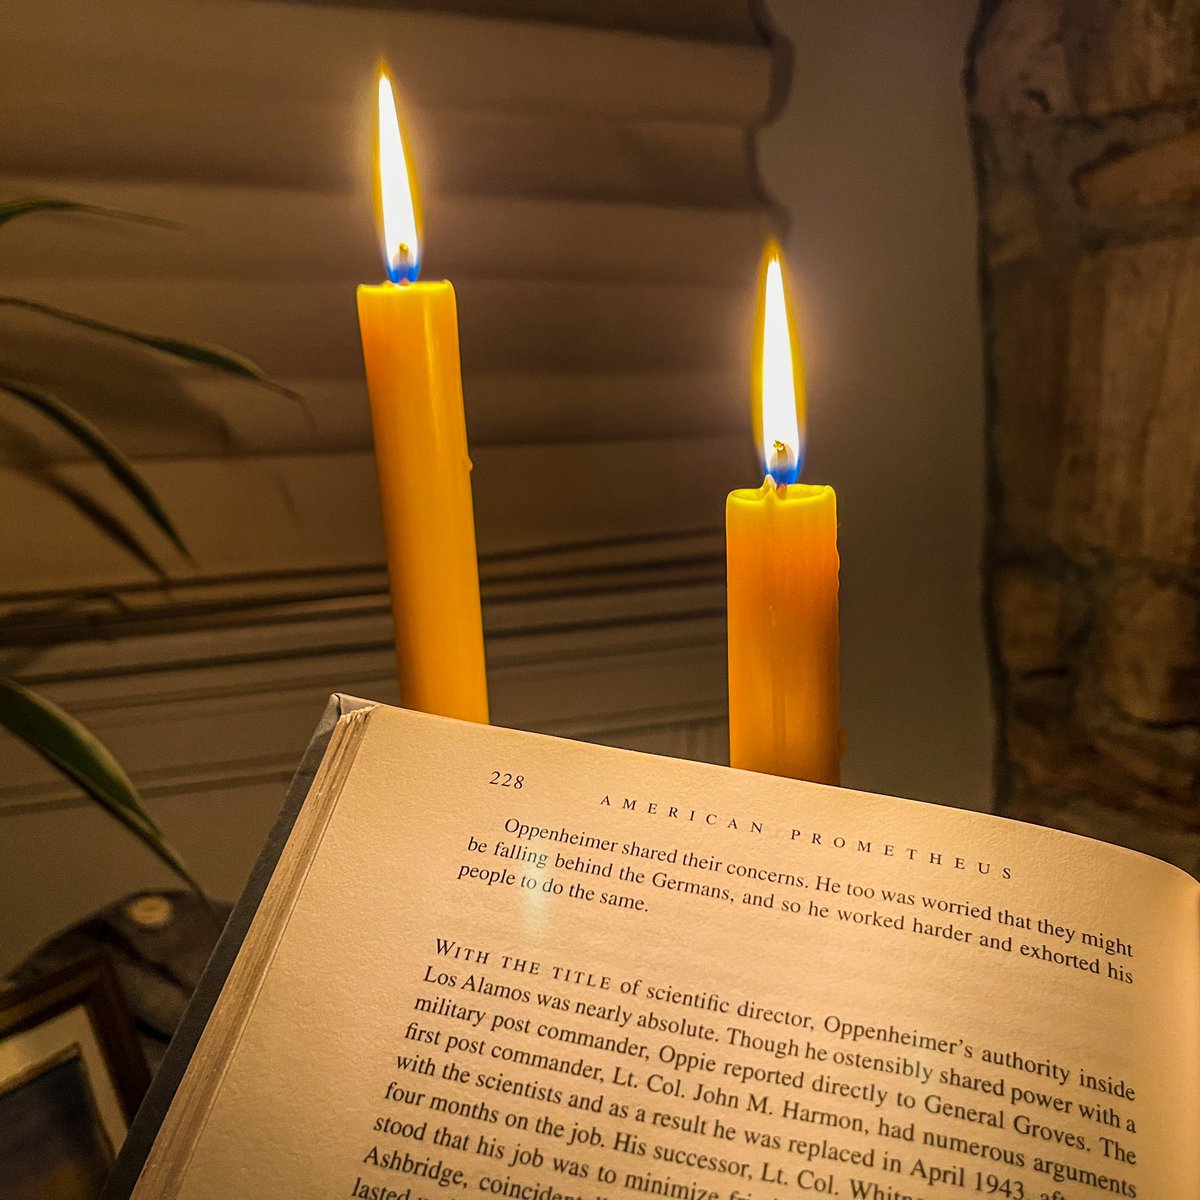 It’s been an evening of #reading by candlelight. Power’s been since 6:40pm & is not supposed to be restored until 11am tomorrow (the culprit is a fallen tree). Open flame seems an appropriate source of illumination for this excellent book.
#AmericanPrometheus